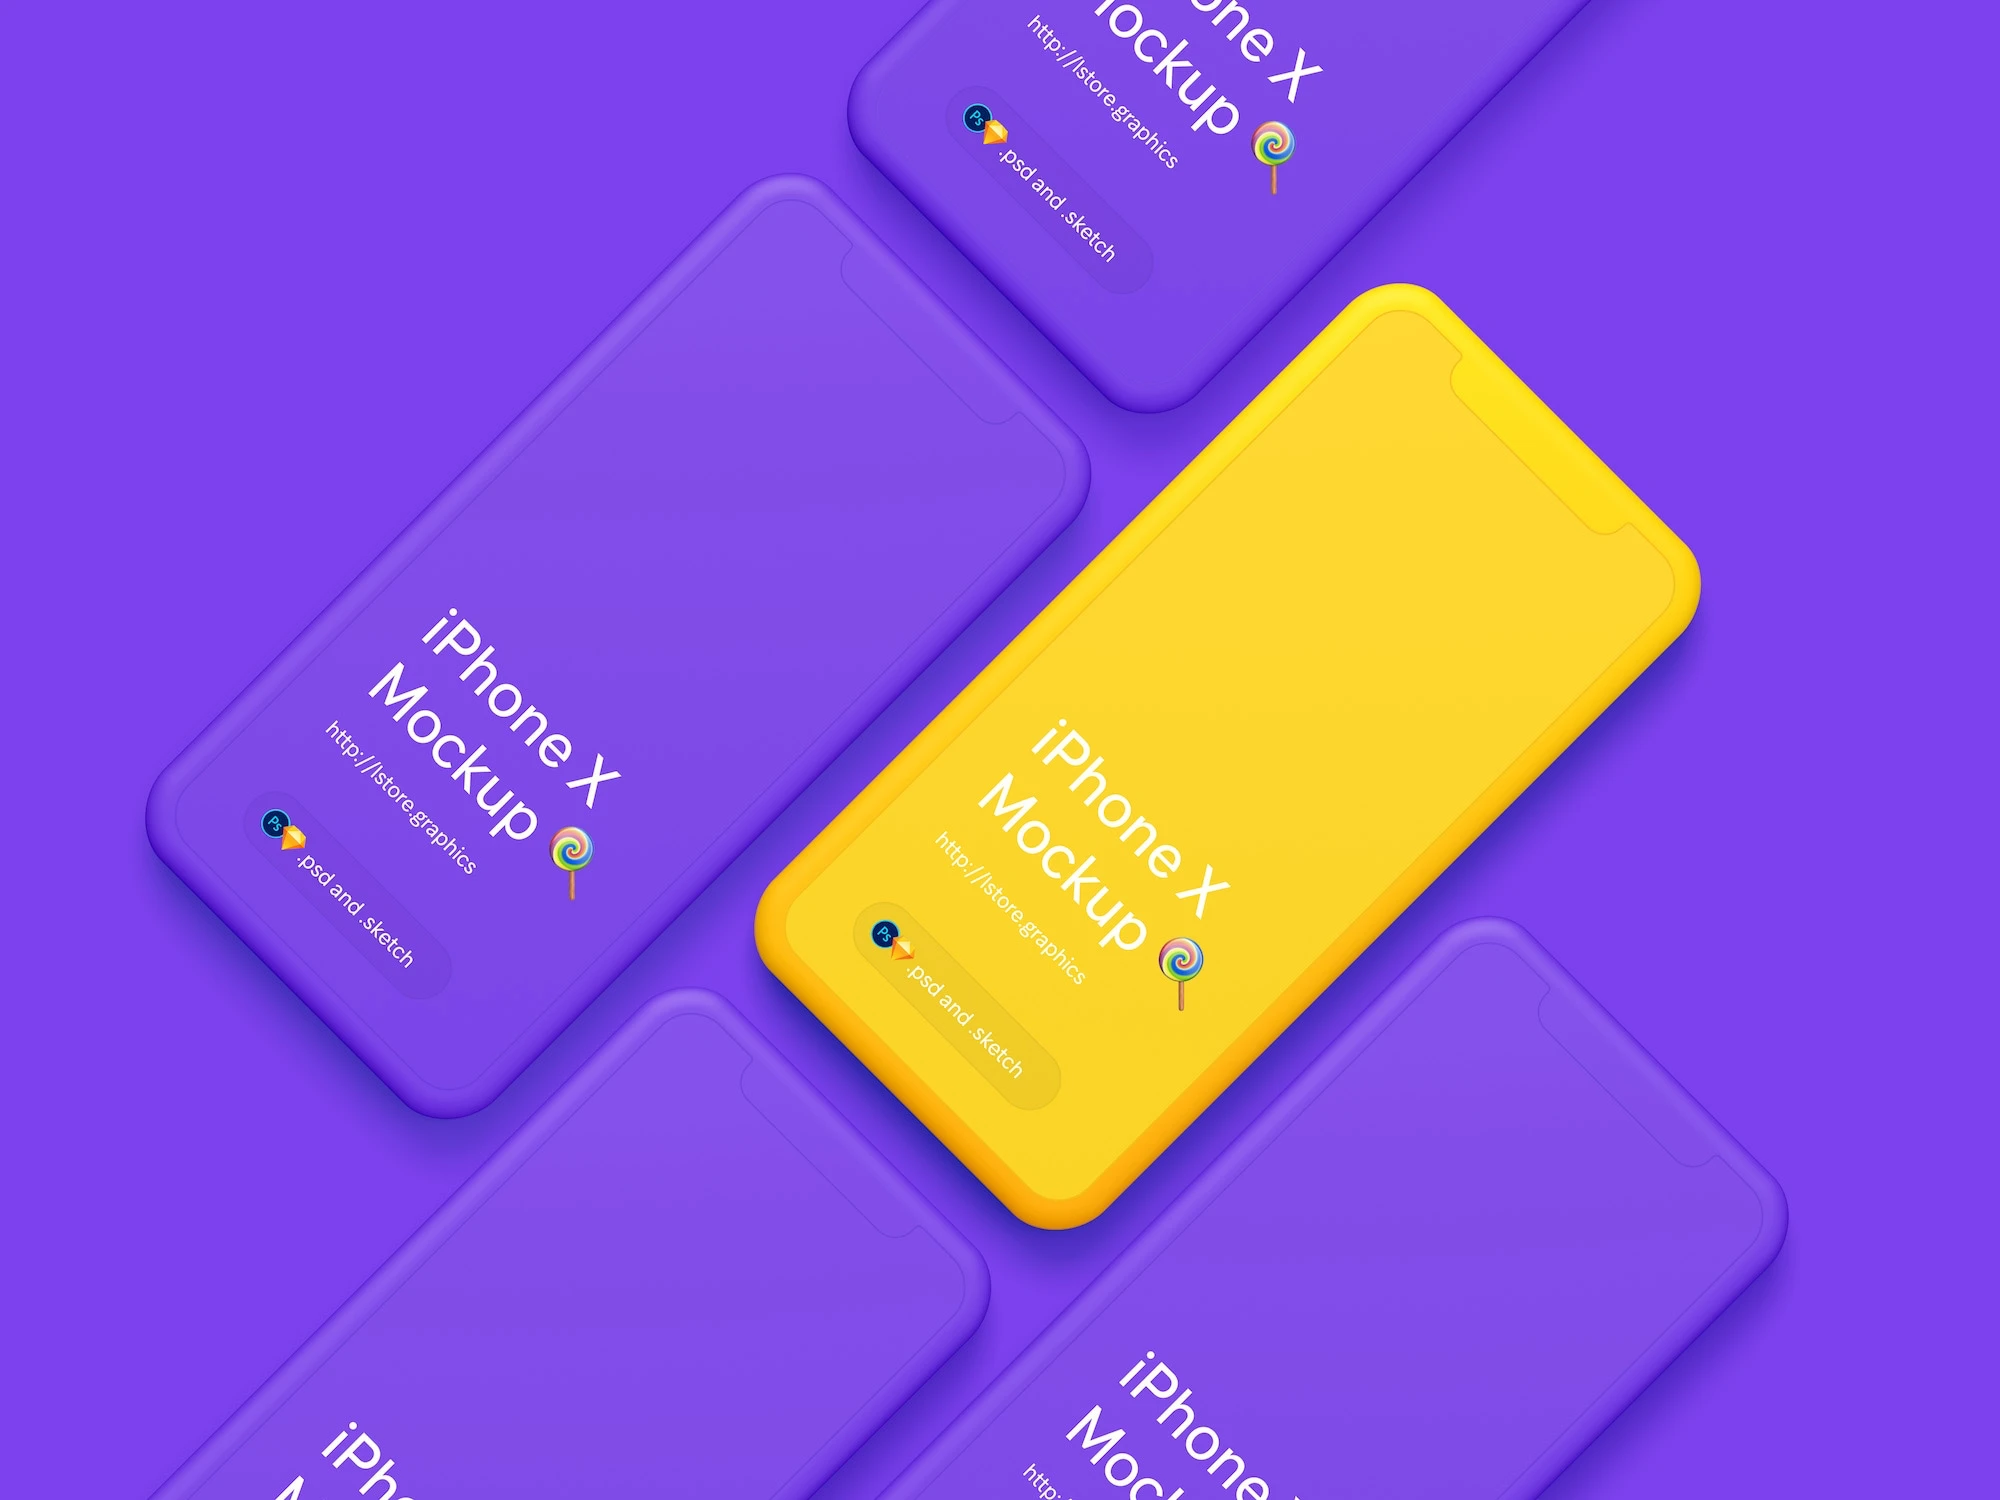 Simple iPhone X Mockups - Super clean, minimalistic free iPhone X mockups with awesome customization features and huge resolution.